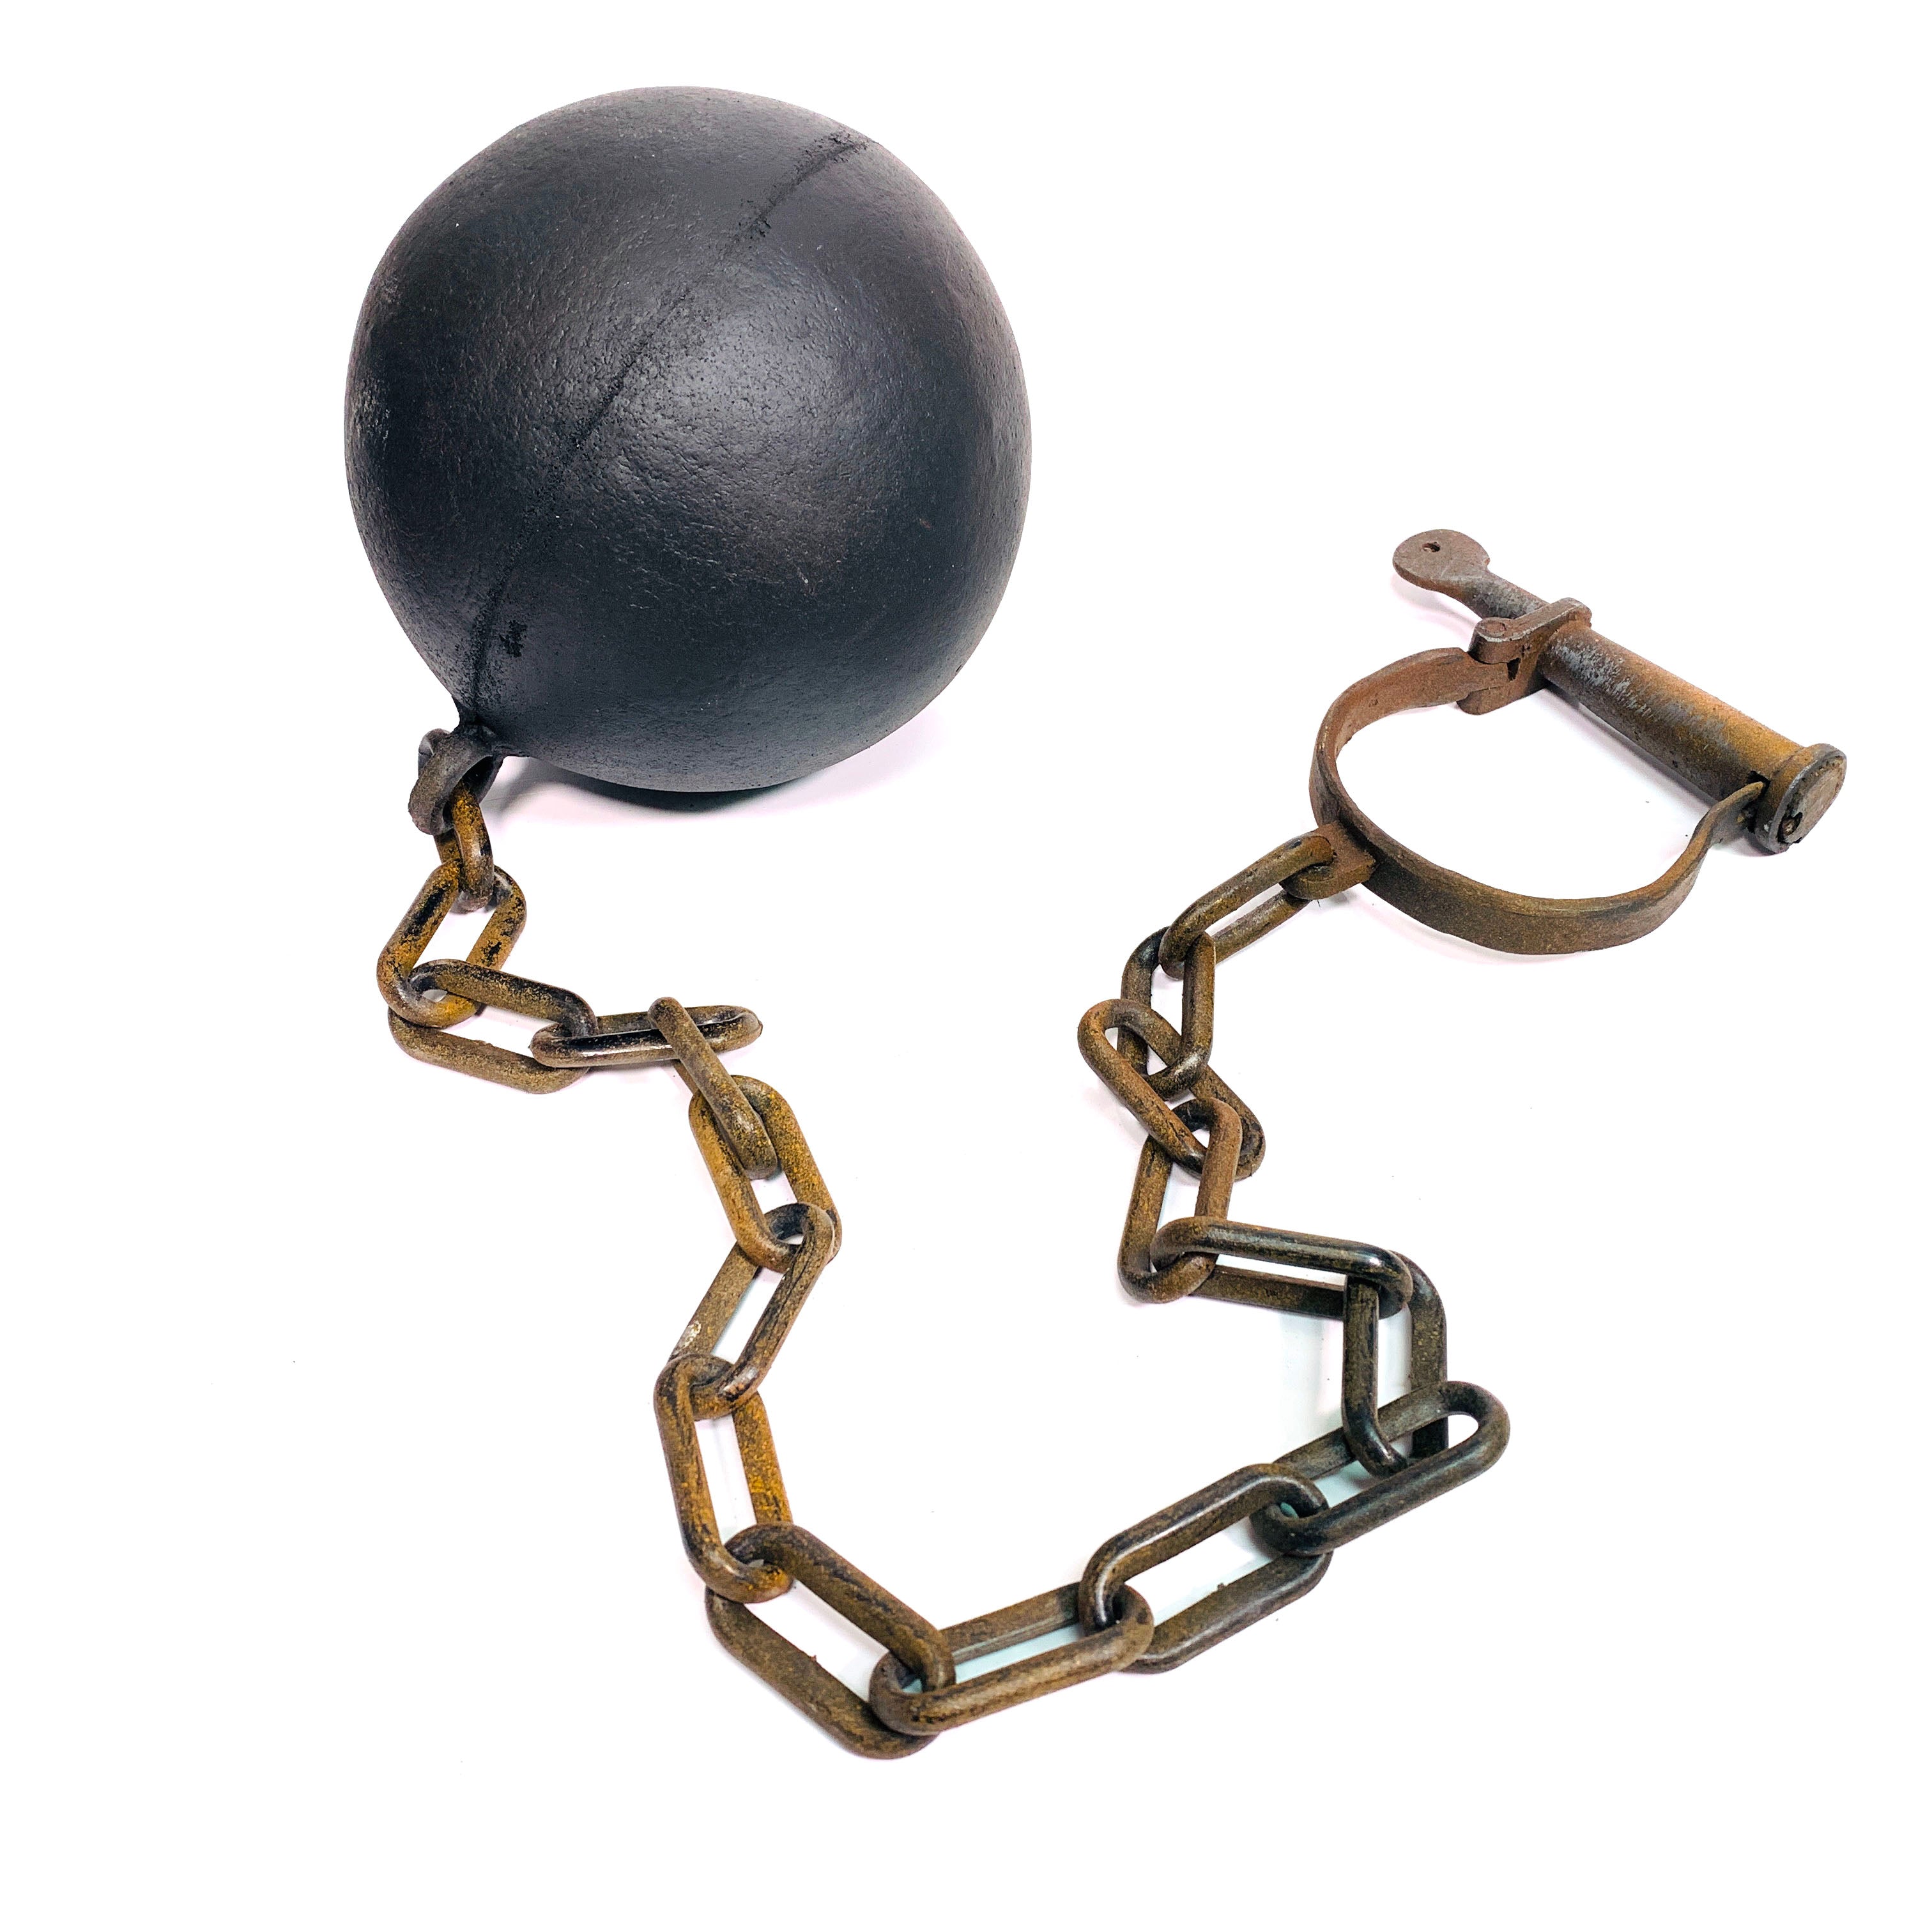 Foam Rubber Ball with Plastic Chain & Prop Leg Iron - Action Prop